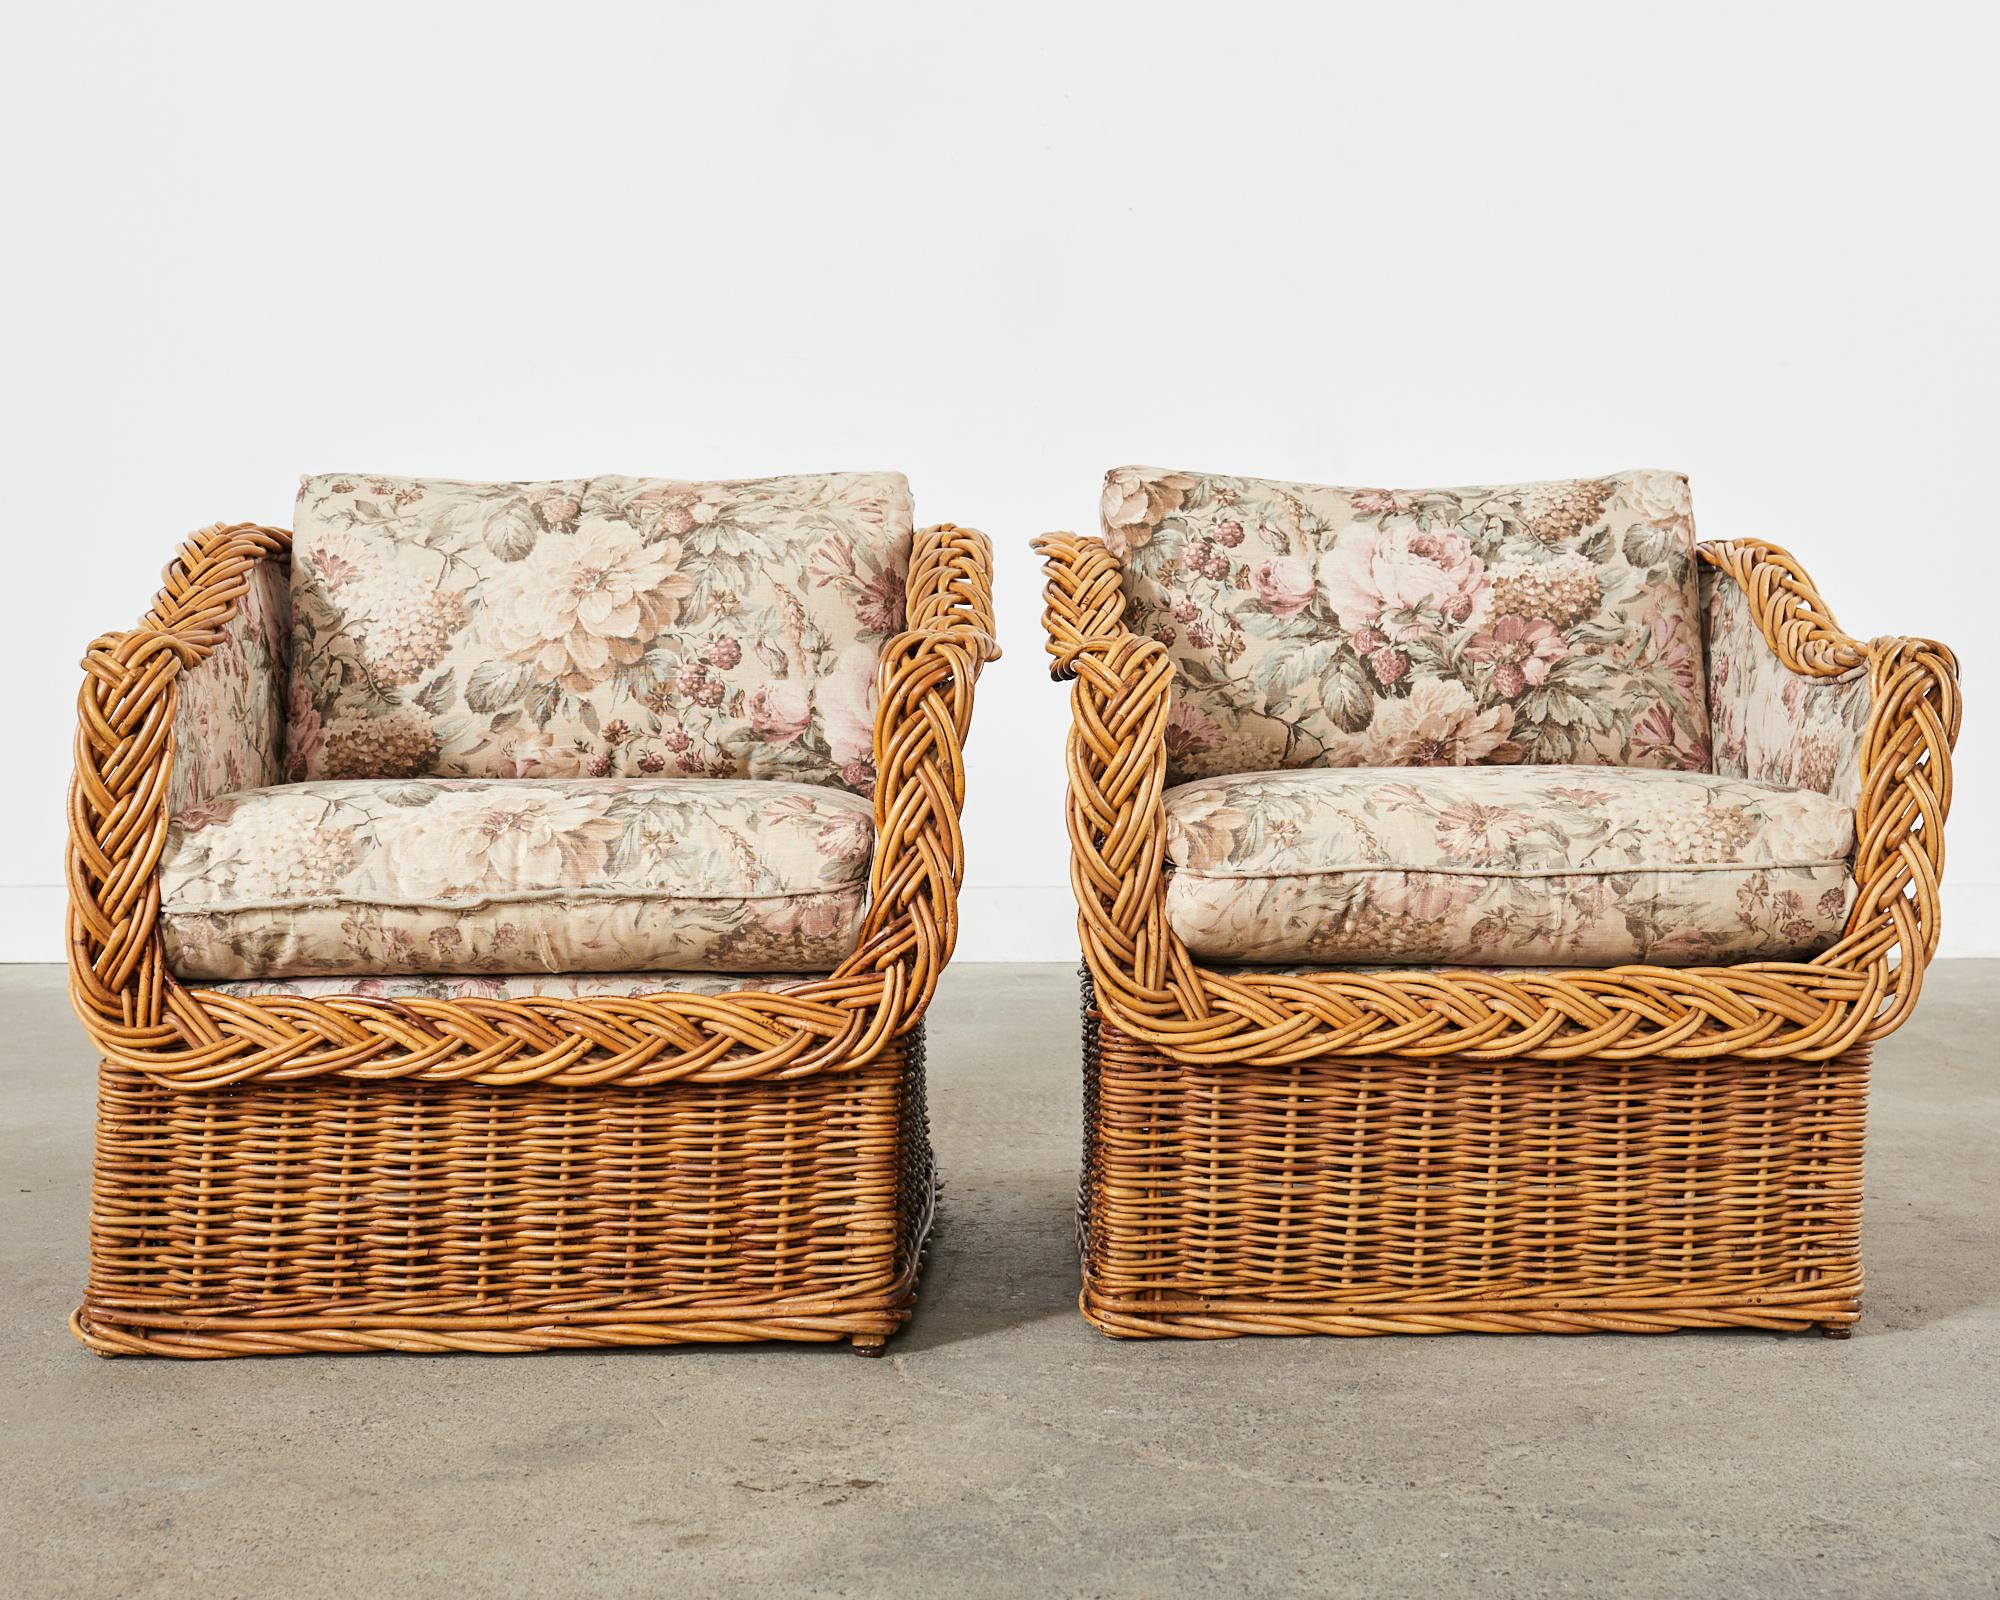 Hand-Crafted Pair of Italian Wicker Works Rattan Lounge Chairs & Ottoman  For Sale